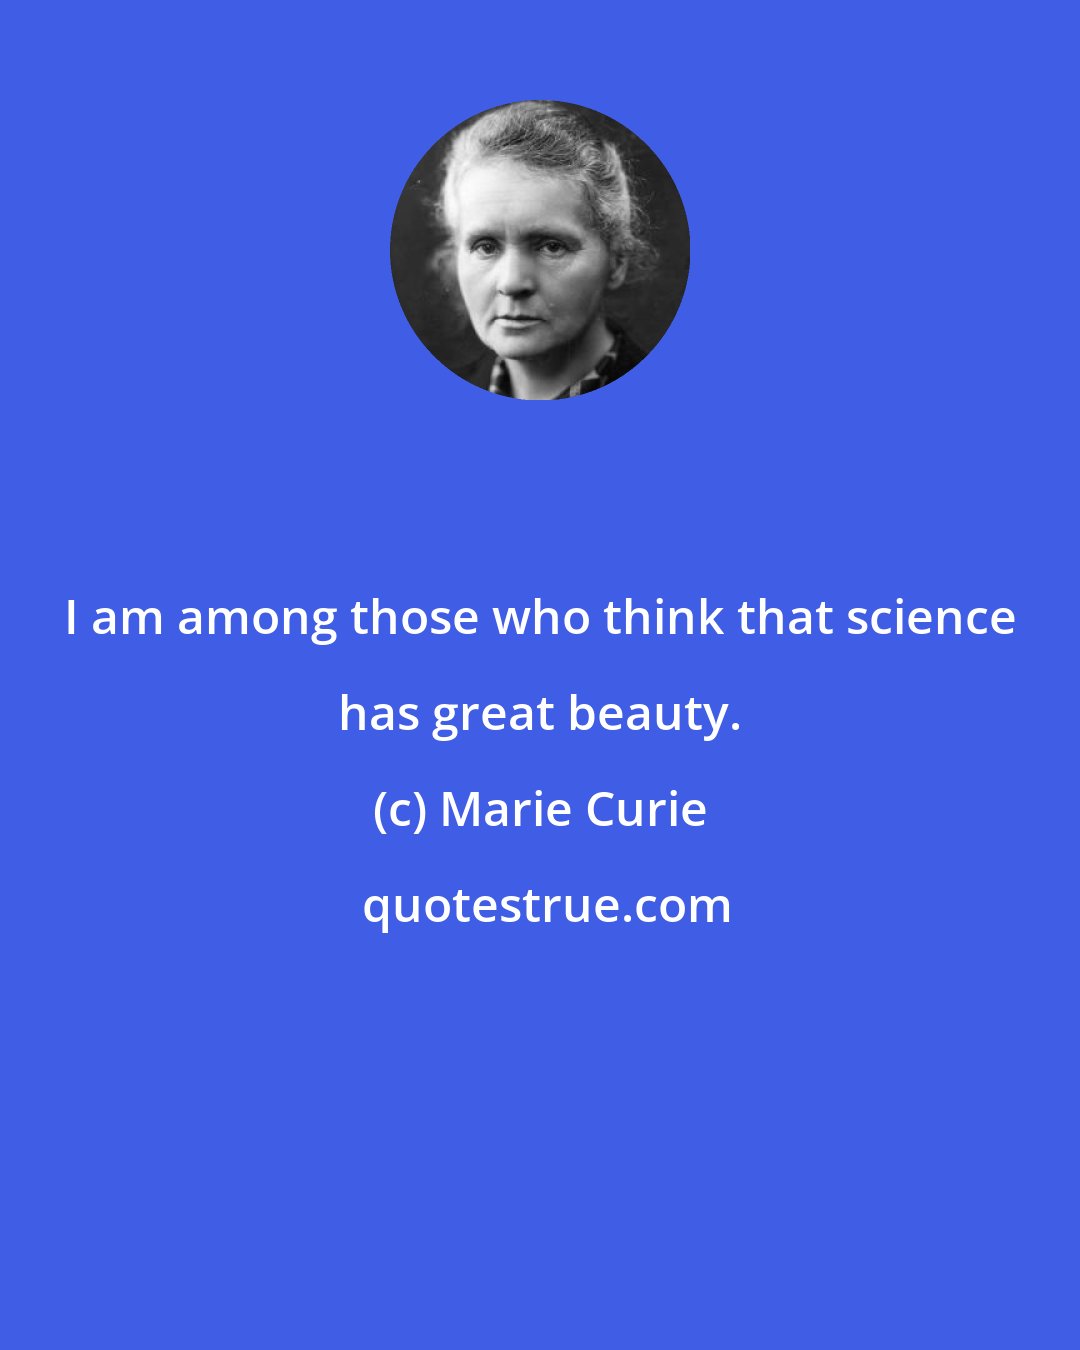 Marie Curie: I am among those who think that science has great beauty.